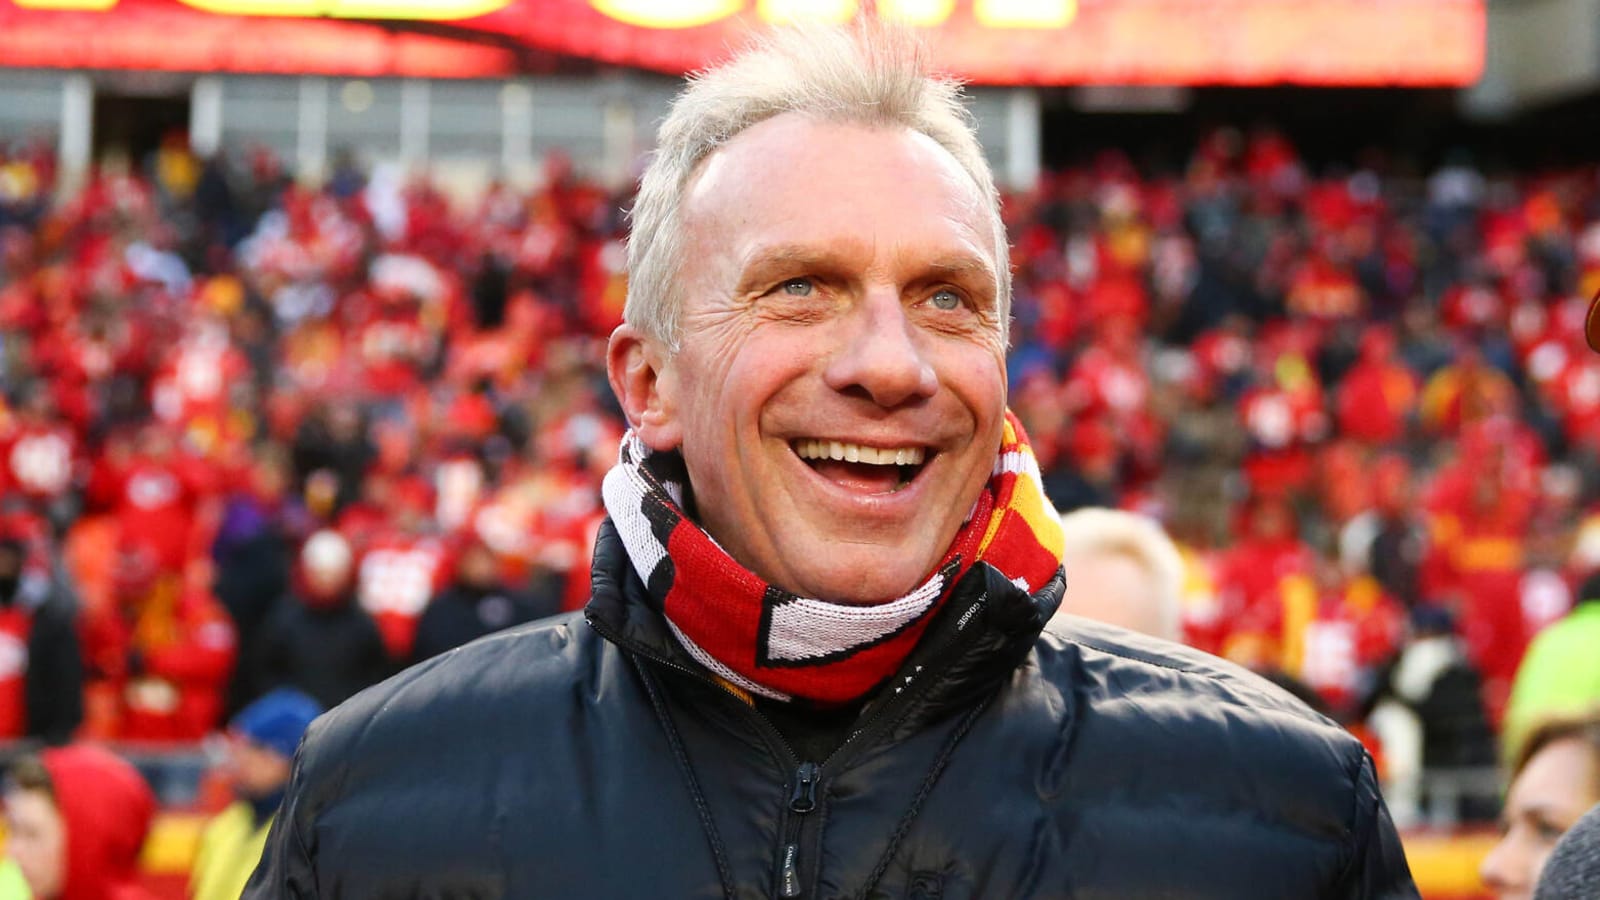 Joe Montana jersey sells for record-shattering price at auction